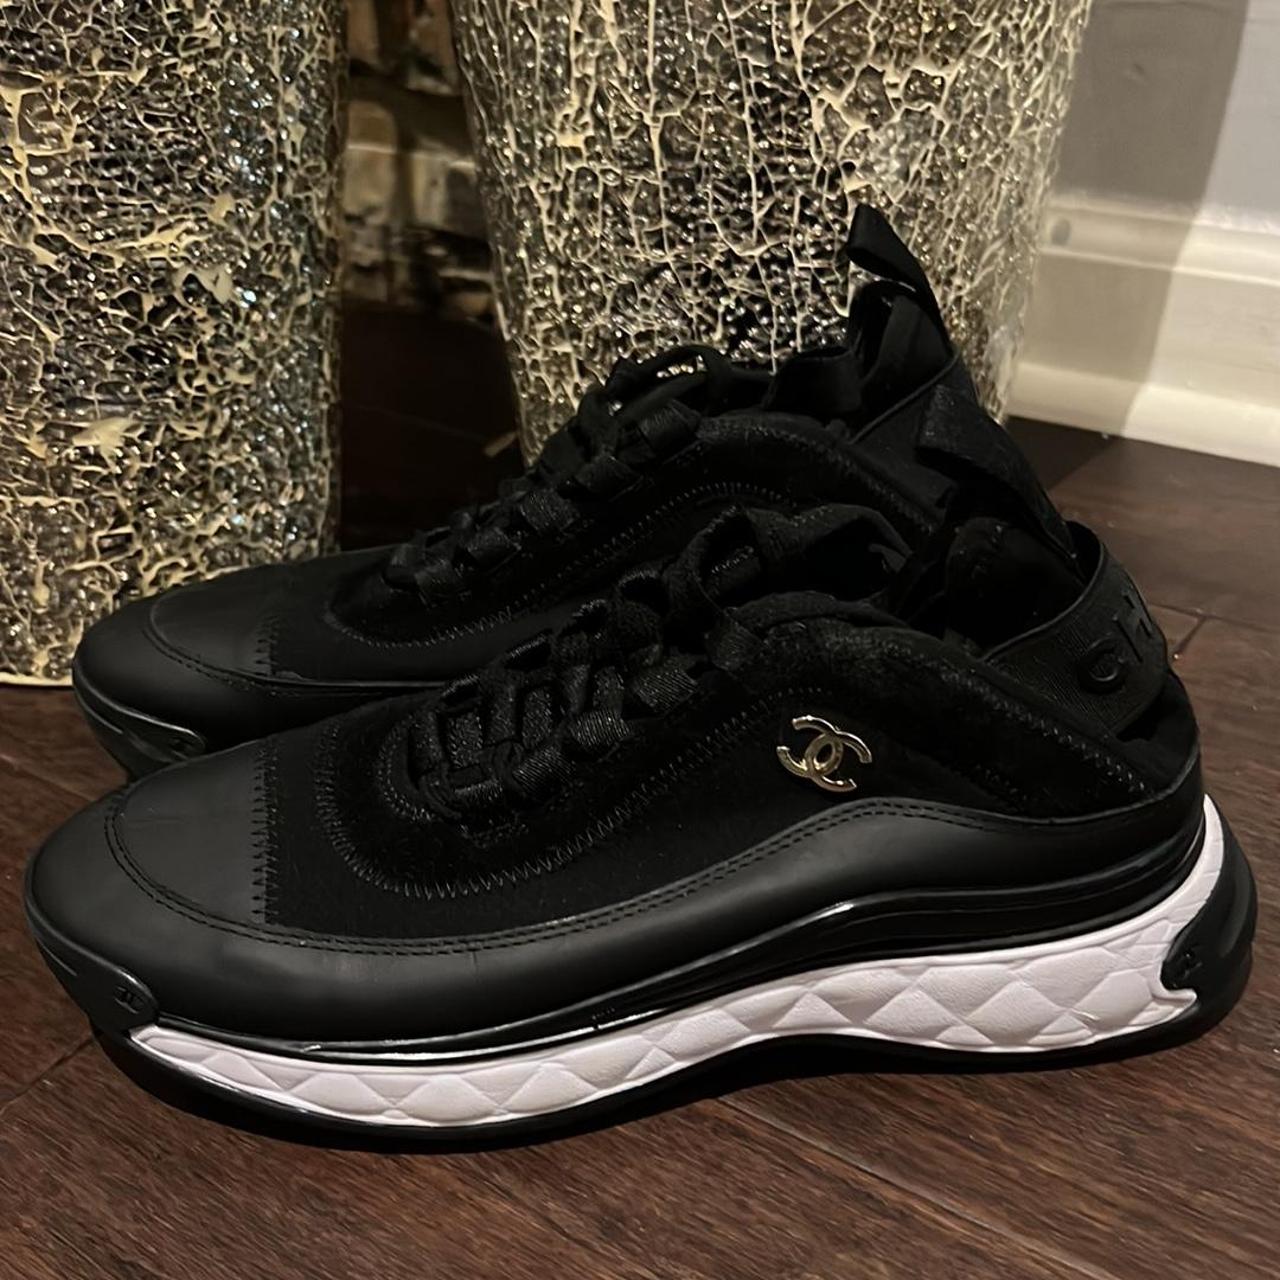 Chanel Women's Black and Gold Trainers | Depop